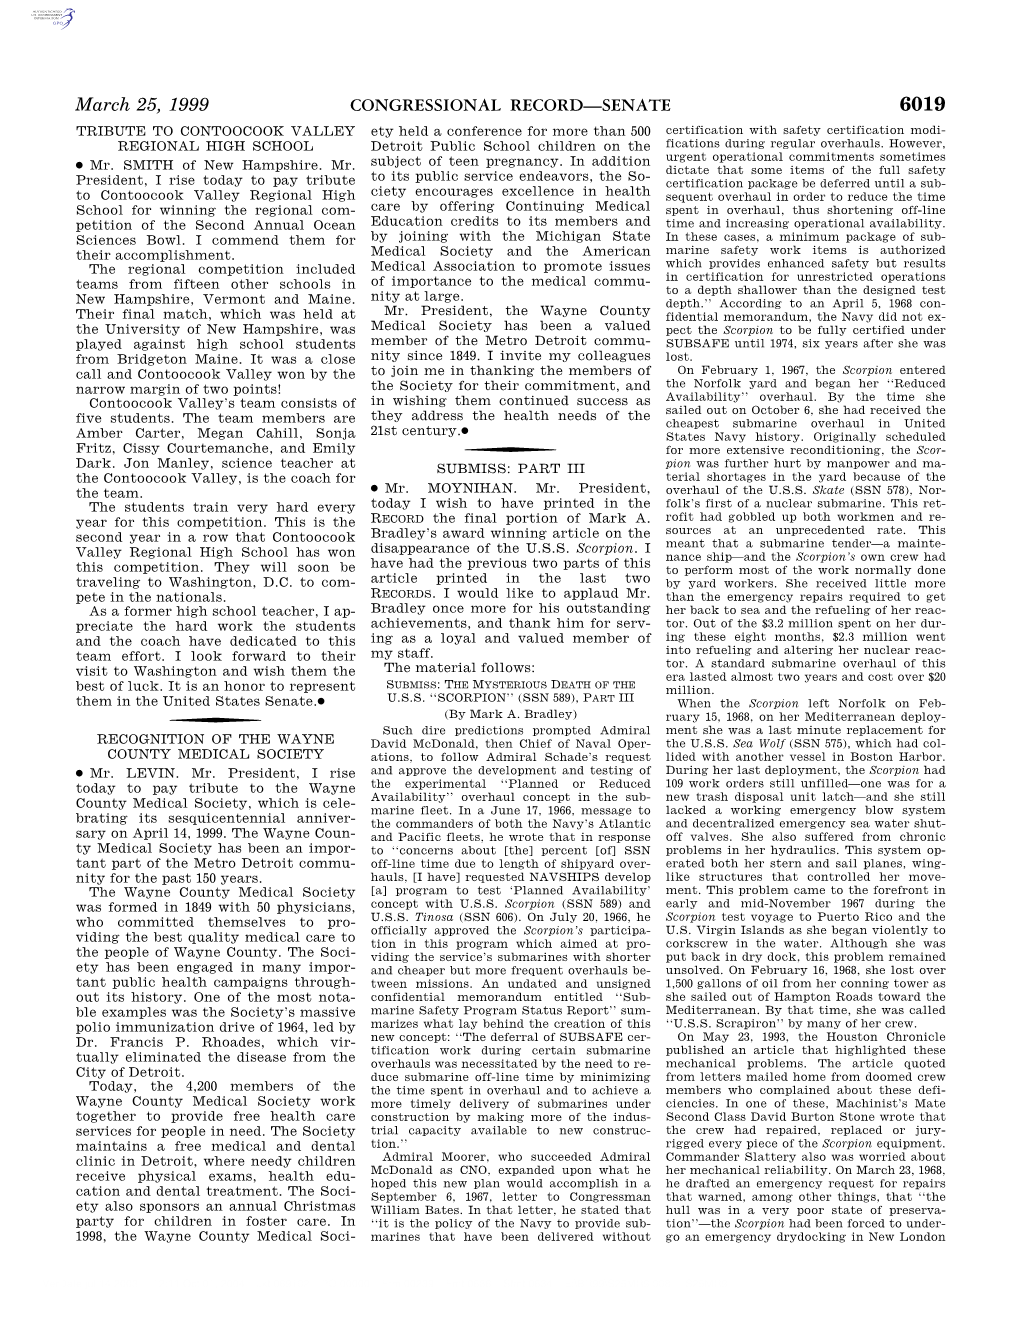 CONGRESSIONAL RECORD—SENATE March 25, 1999 Immediately After Her Reduced Overhaul Be- Tigations That Followed the Thresher’S De- That Was Both Safe and Effective